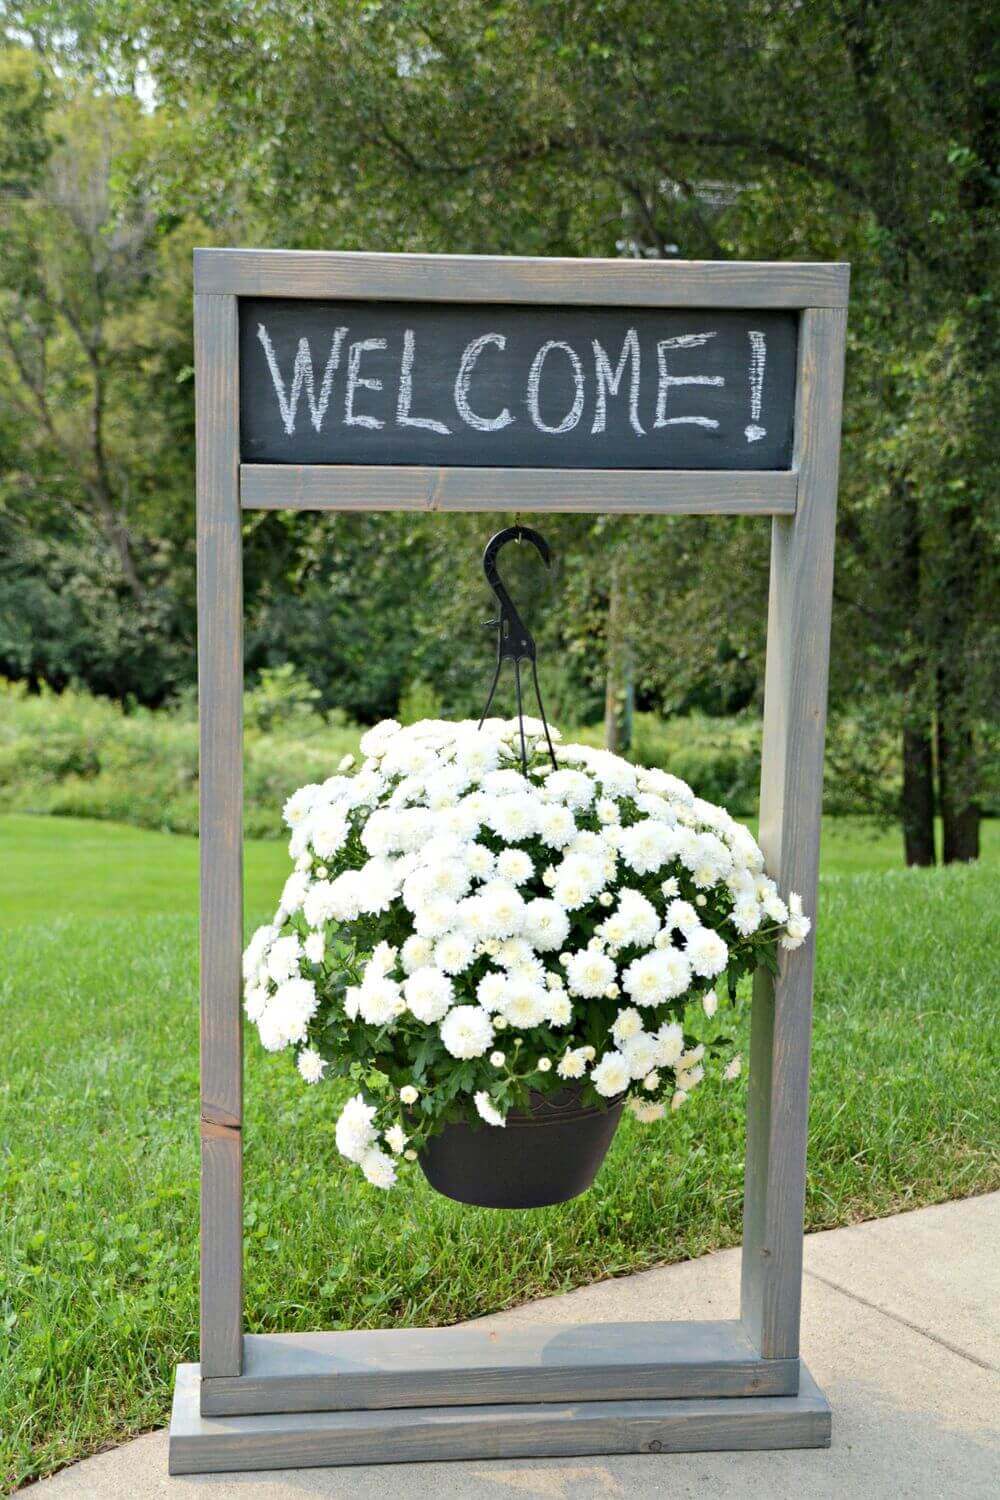 Entryway Chalkboard Sign and Hanging Planter | DIY Outdoor Hanging Planter Ideas | Plant Pot Design Ideas